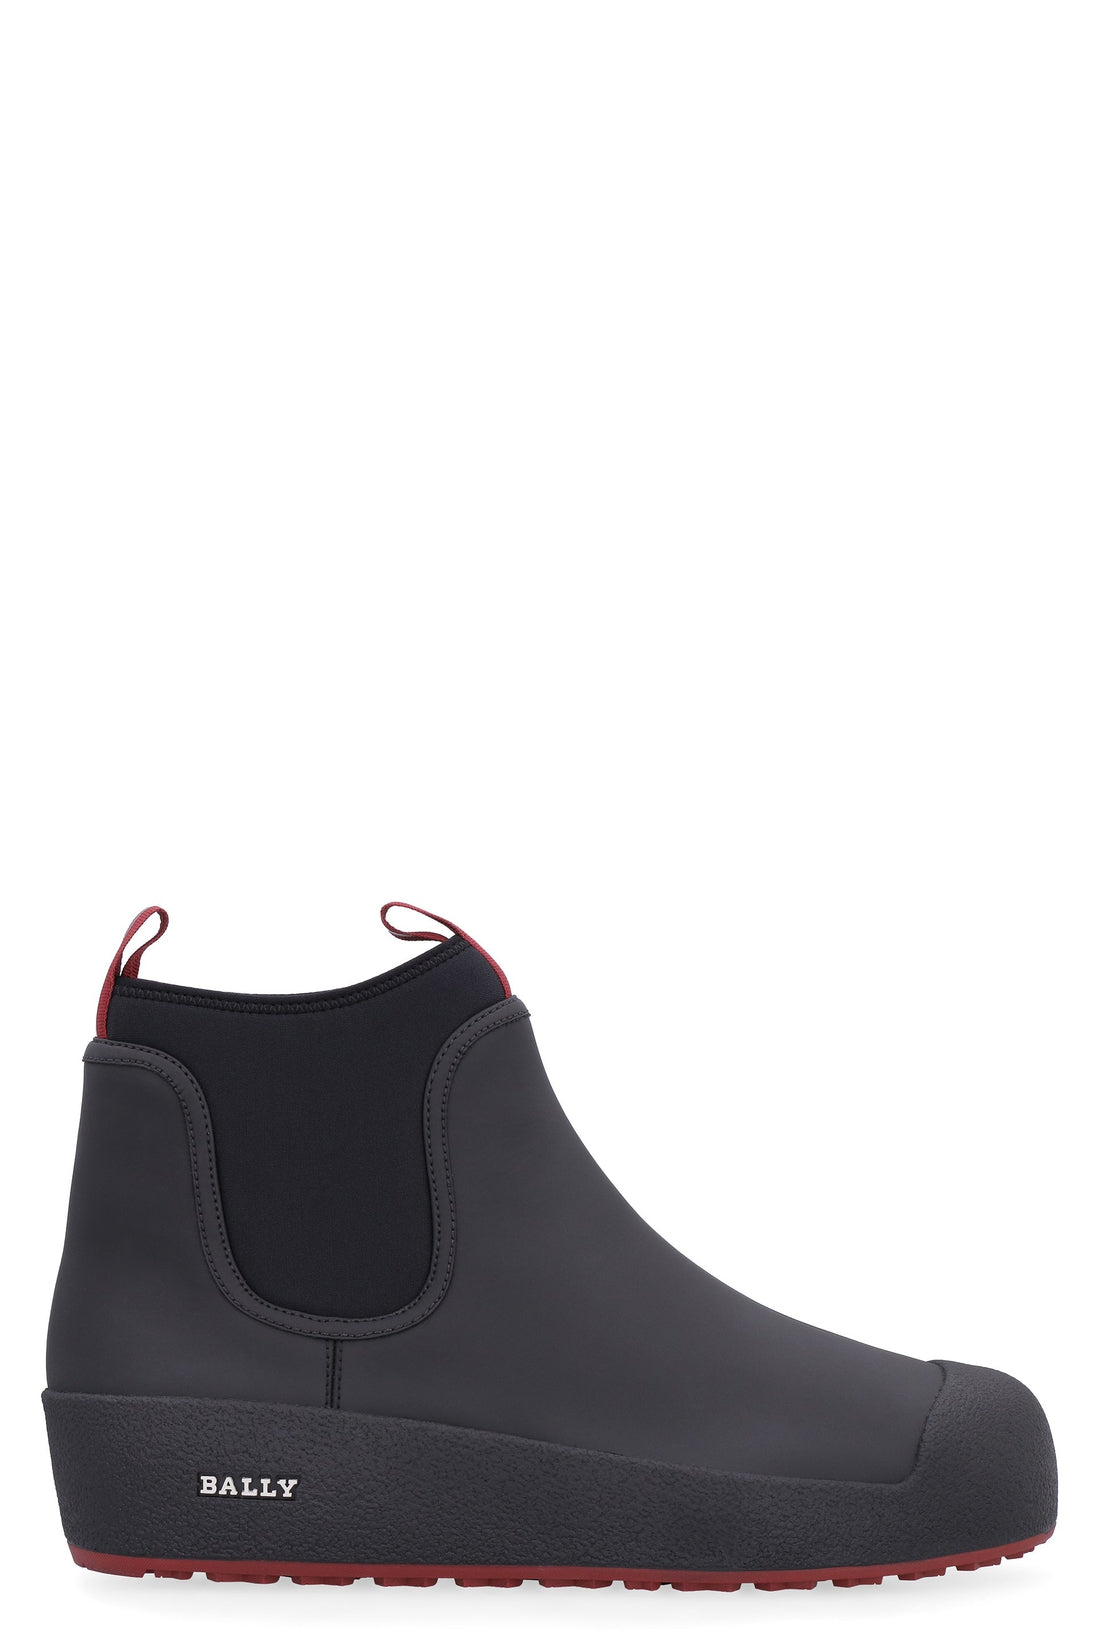 Bally-OUTLET-SALE-Cubrid leather chelsea boots-ARCHIVIST